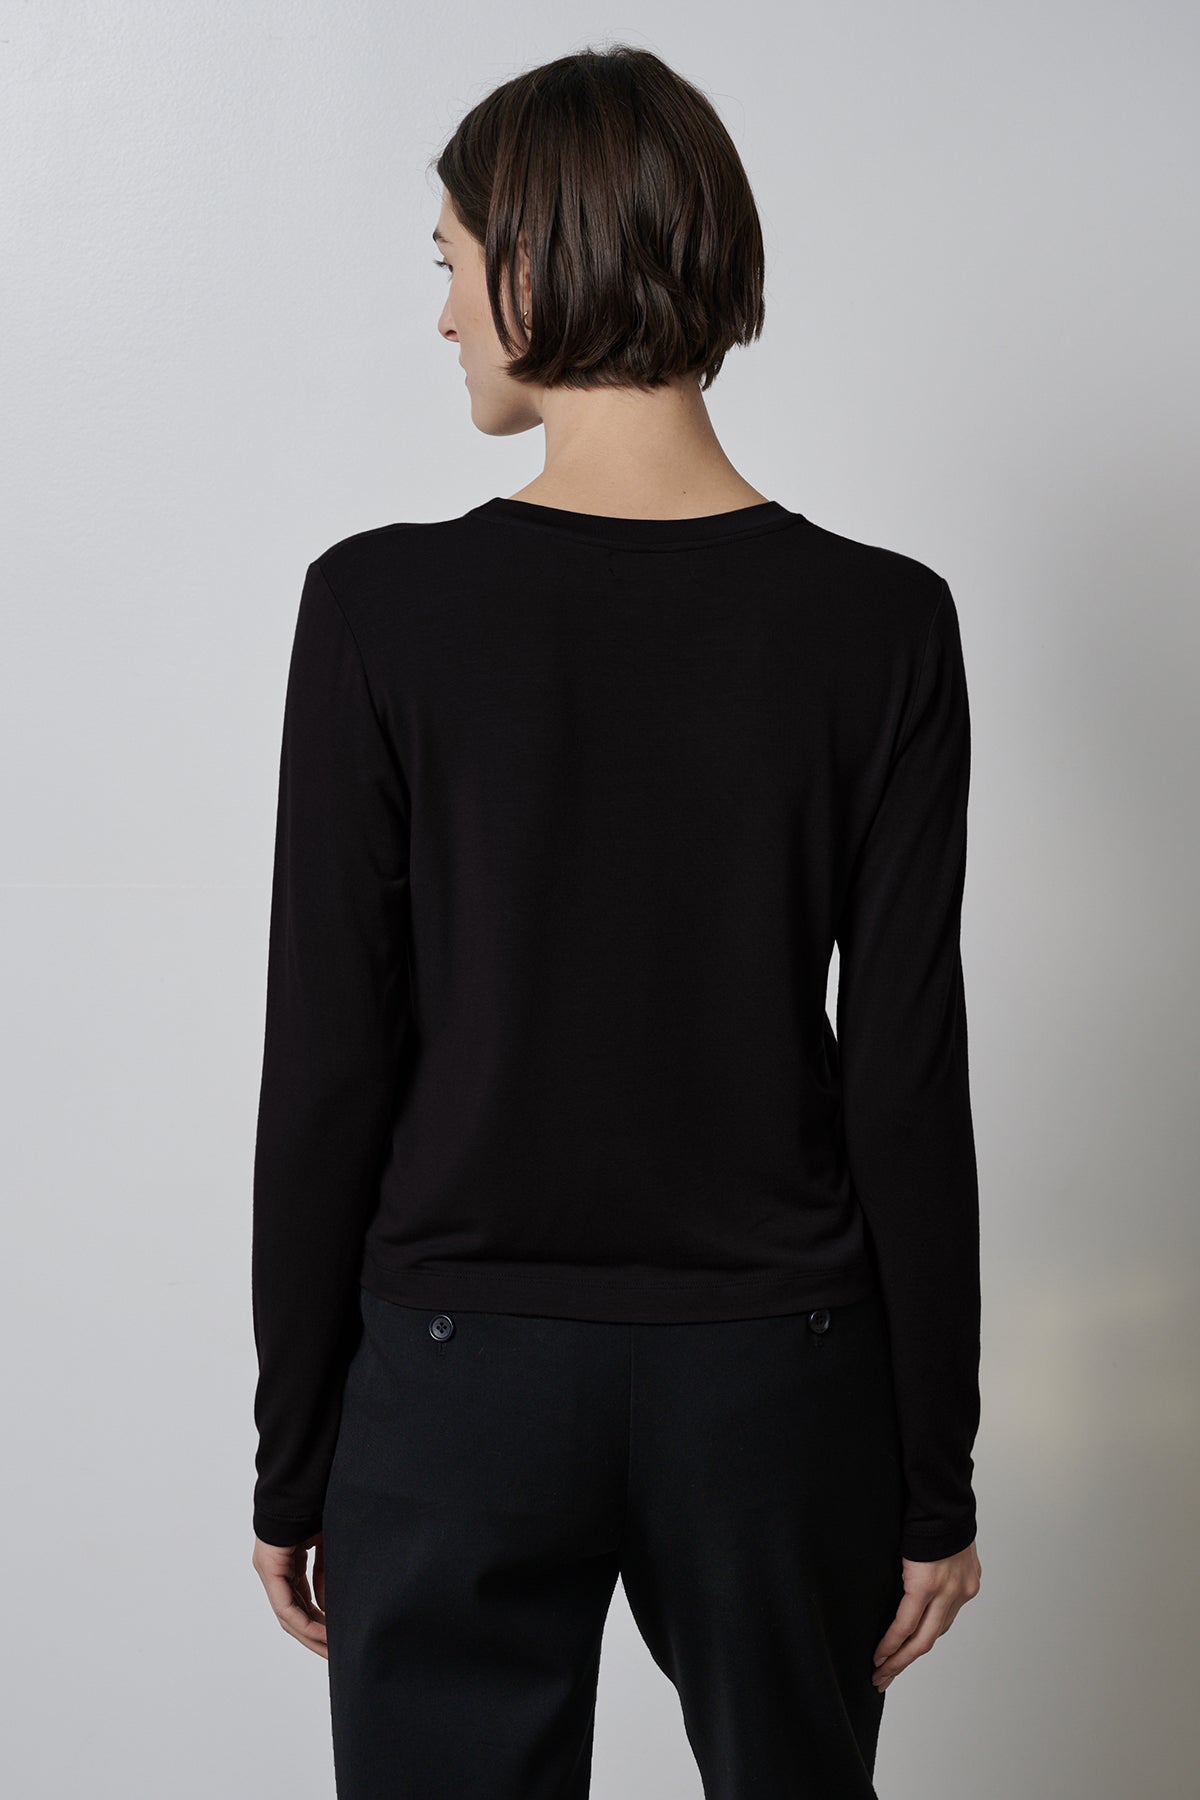 A woman wearing a black rib knit PACIFICA TEE by Velvet by Jenny Graham and slim-fitting black pants is seen from the back view.-35416710152385